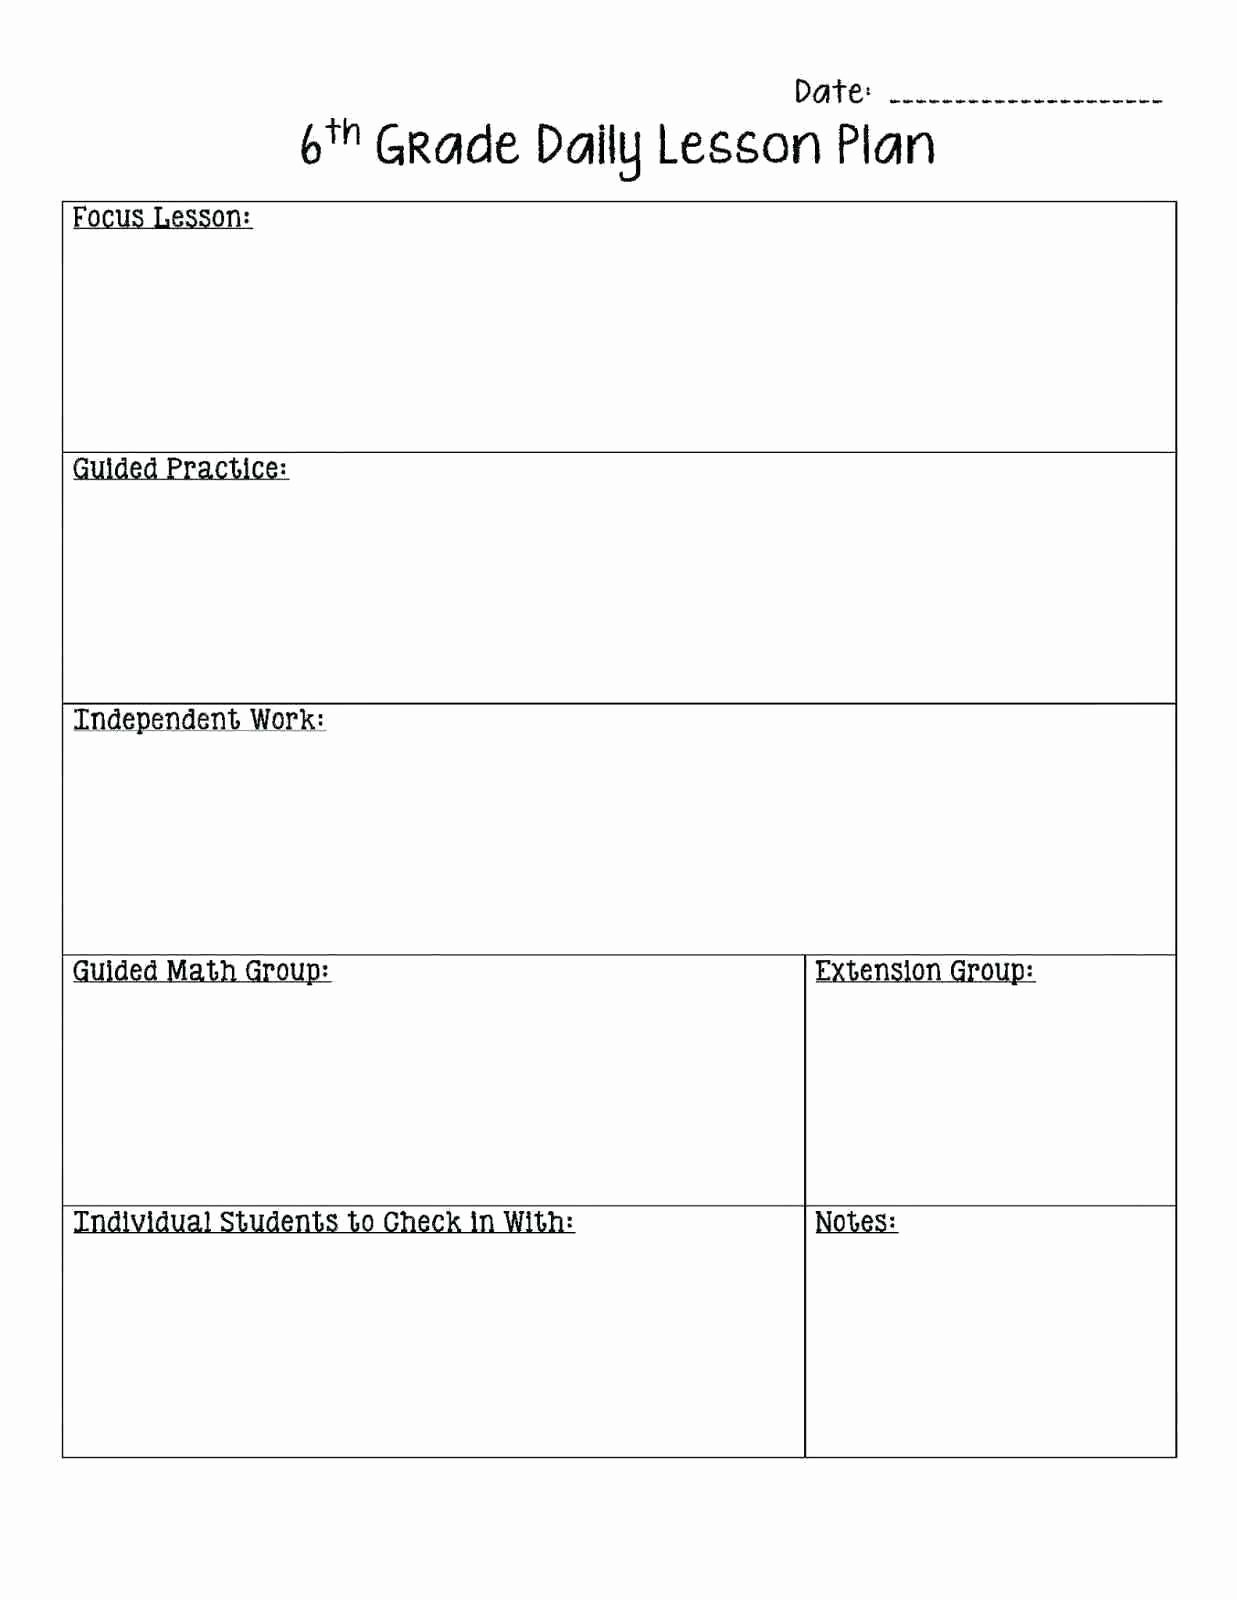 Library Lesson Plan Template Best Of Goddard School Lesson Plan Template Resume for Teachers